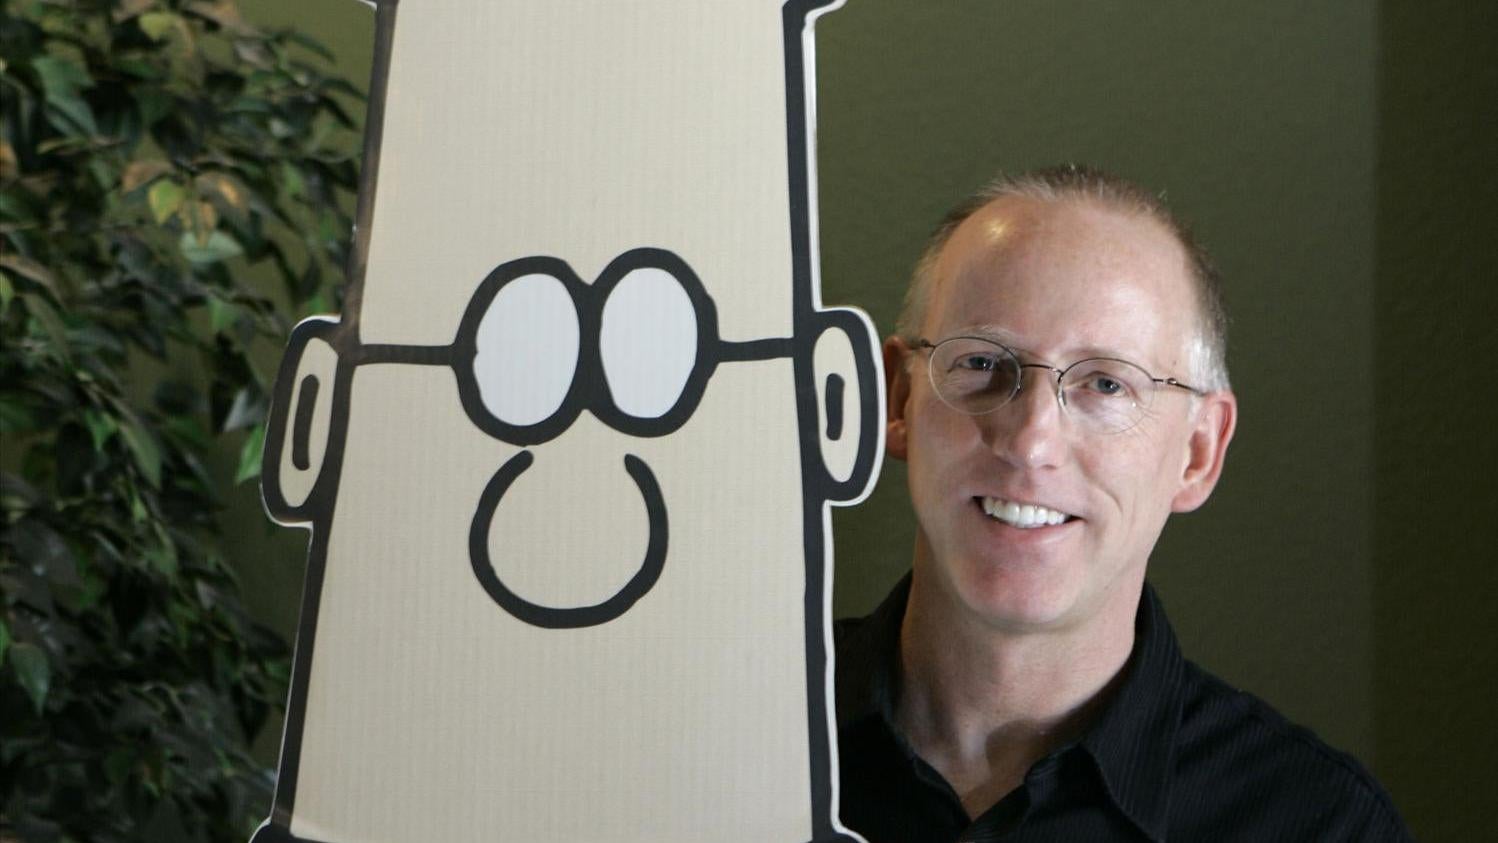 Adams poses with a Dilbert cutout in 2006. (Photo: AP Photo, AP)